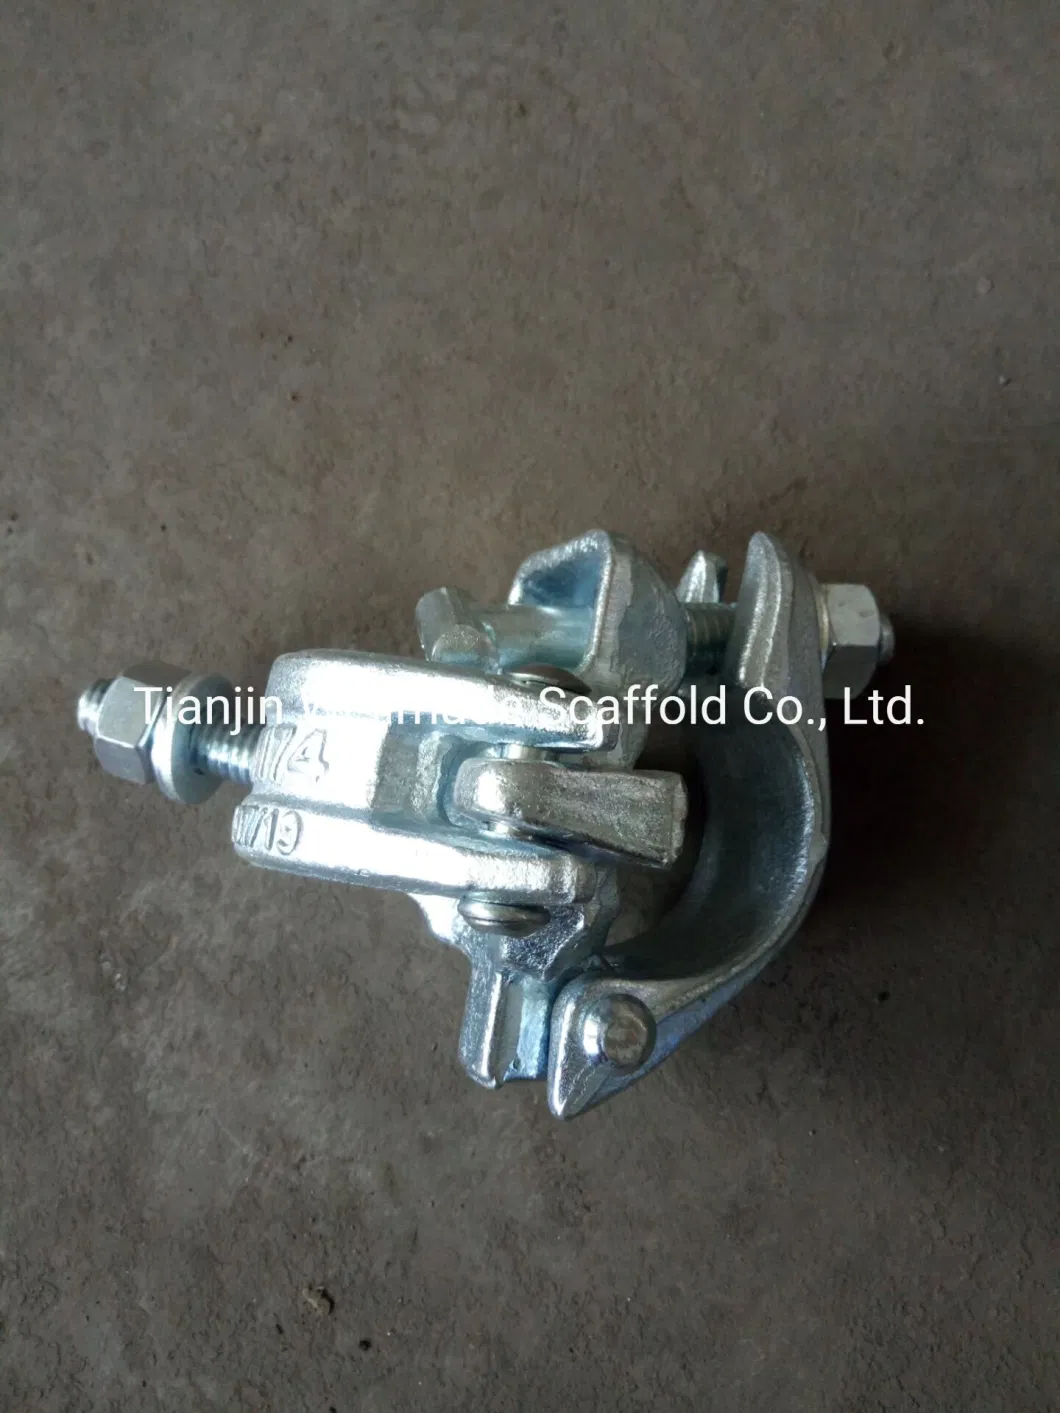 Scaffolding Pipe Fittings Double Fixed Coupler Swivel Clamp